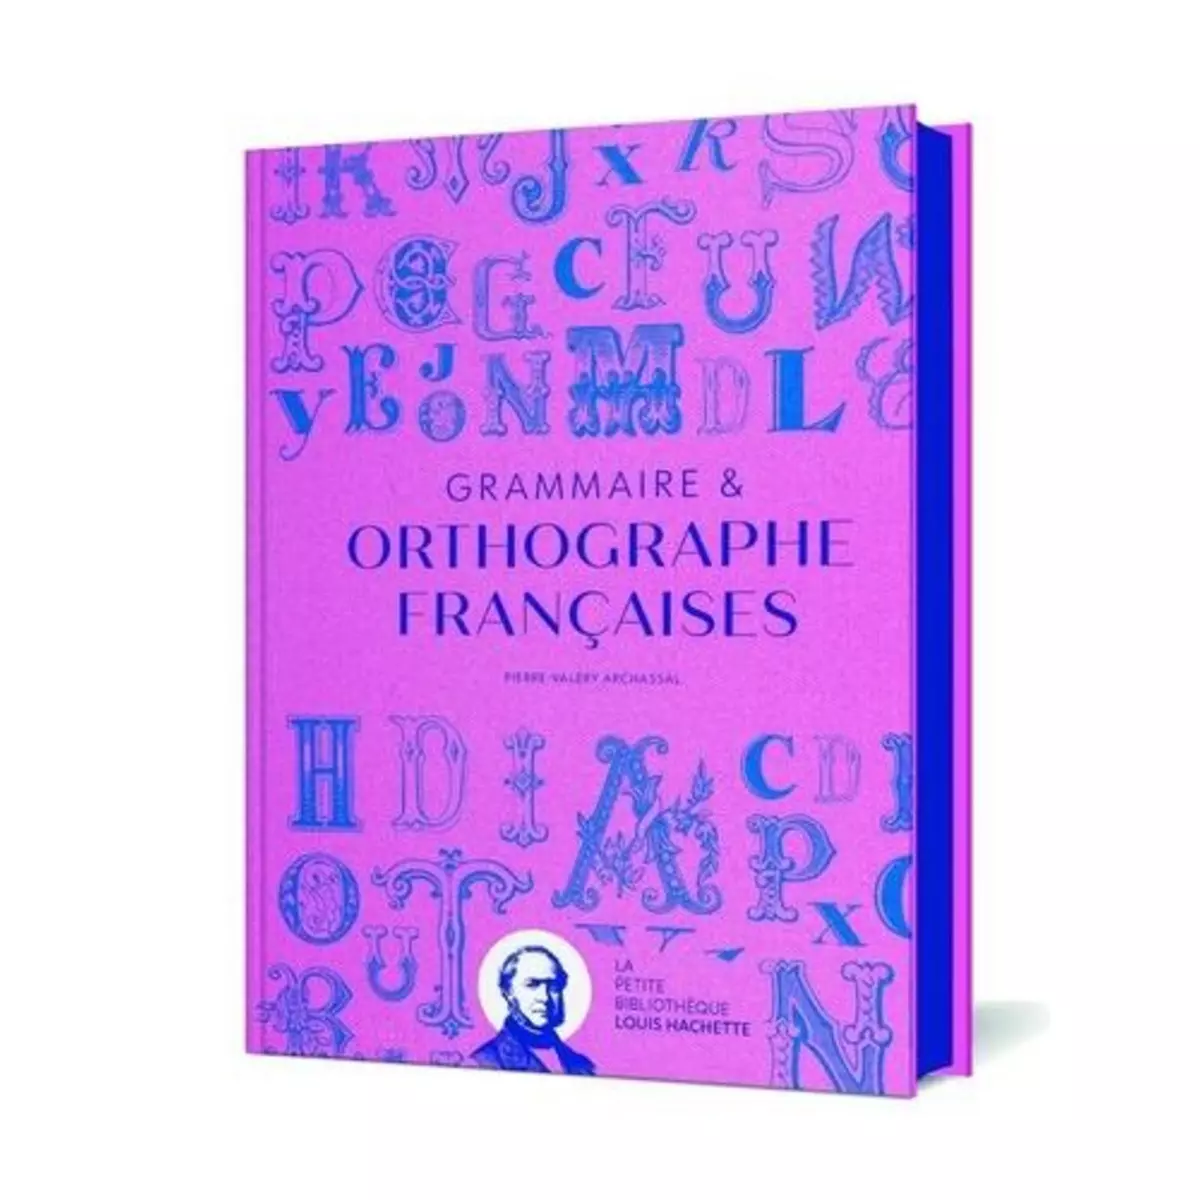  GRAMMAIRE & ORTHOGRAPHE FRANCAISES, Archassal Pierre-Valéry